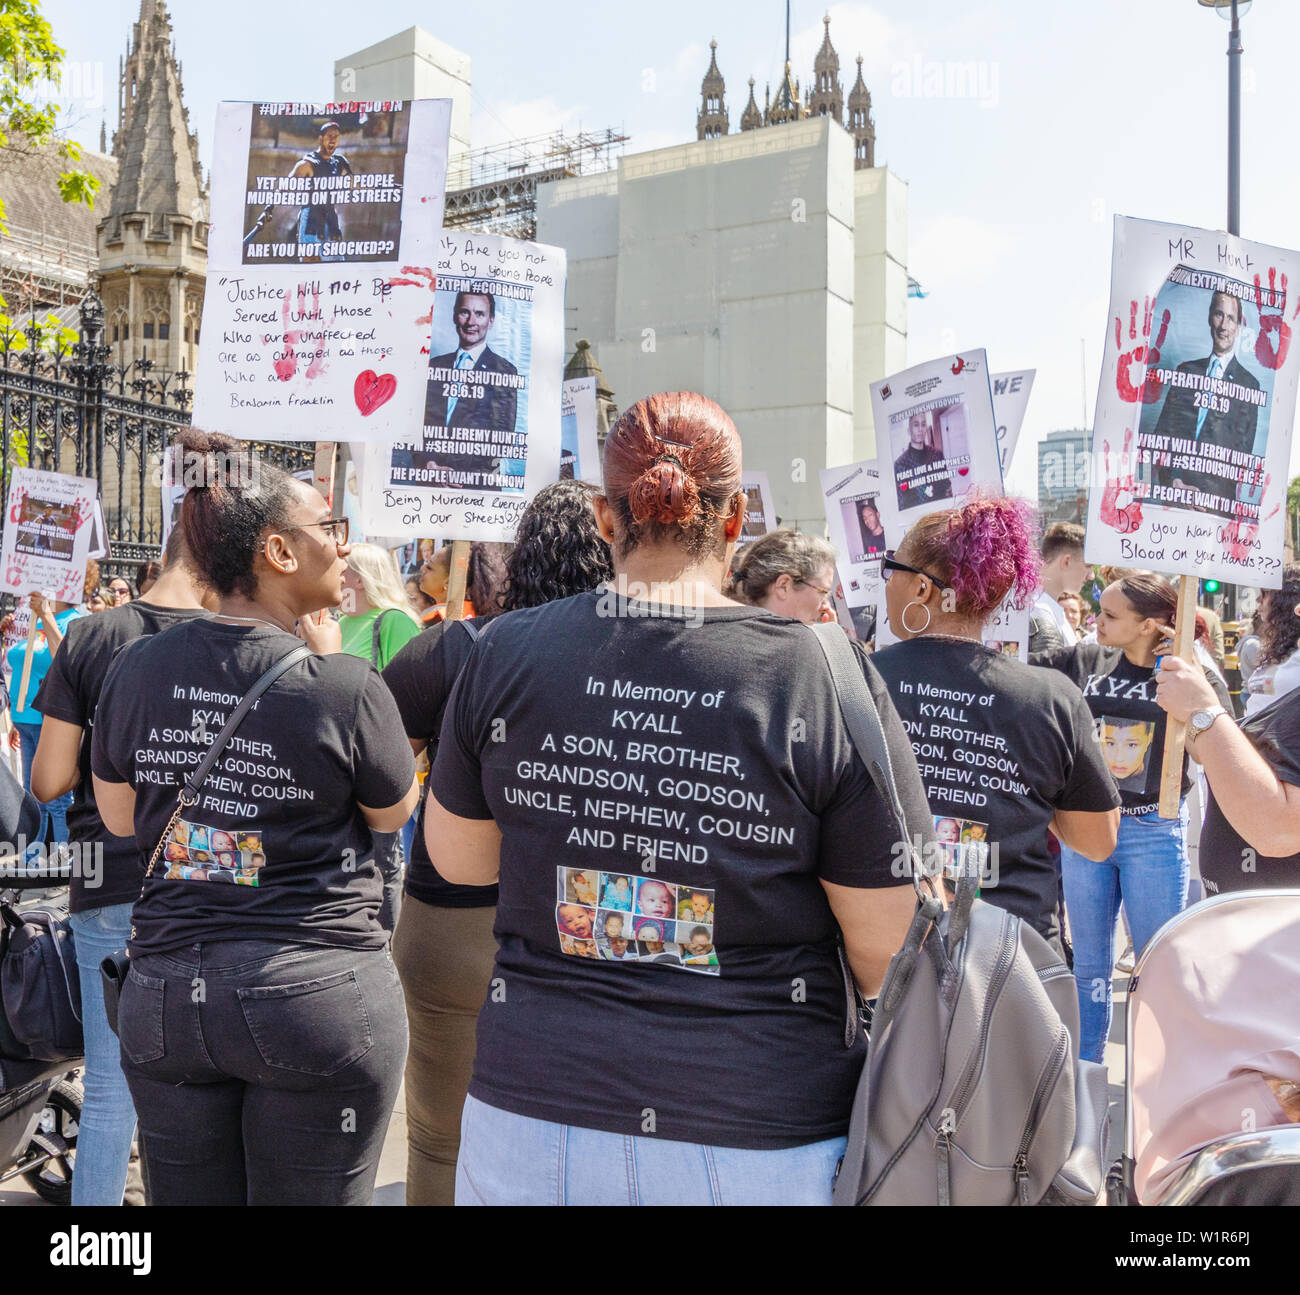 London / UK June 26th 2019. Operation Shutdown anti-knife crime campaigners protest outside Parliament in Westminster, calling on the government to ta Stock Photo